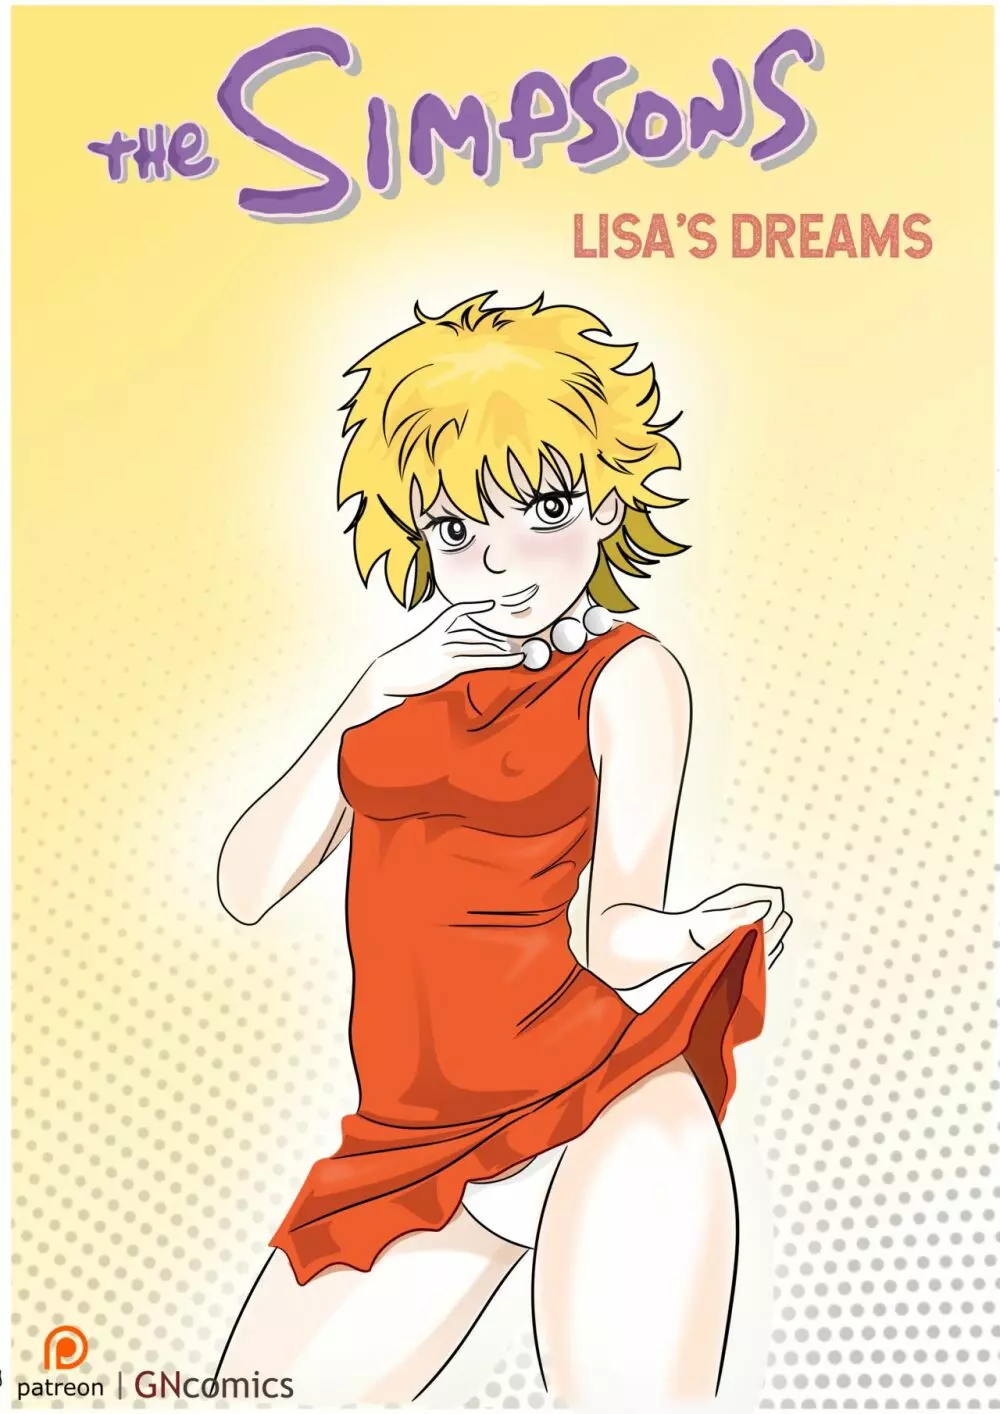 Lisa’s Dreams (Simpsons) Ongoing